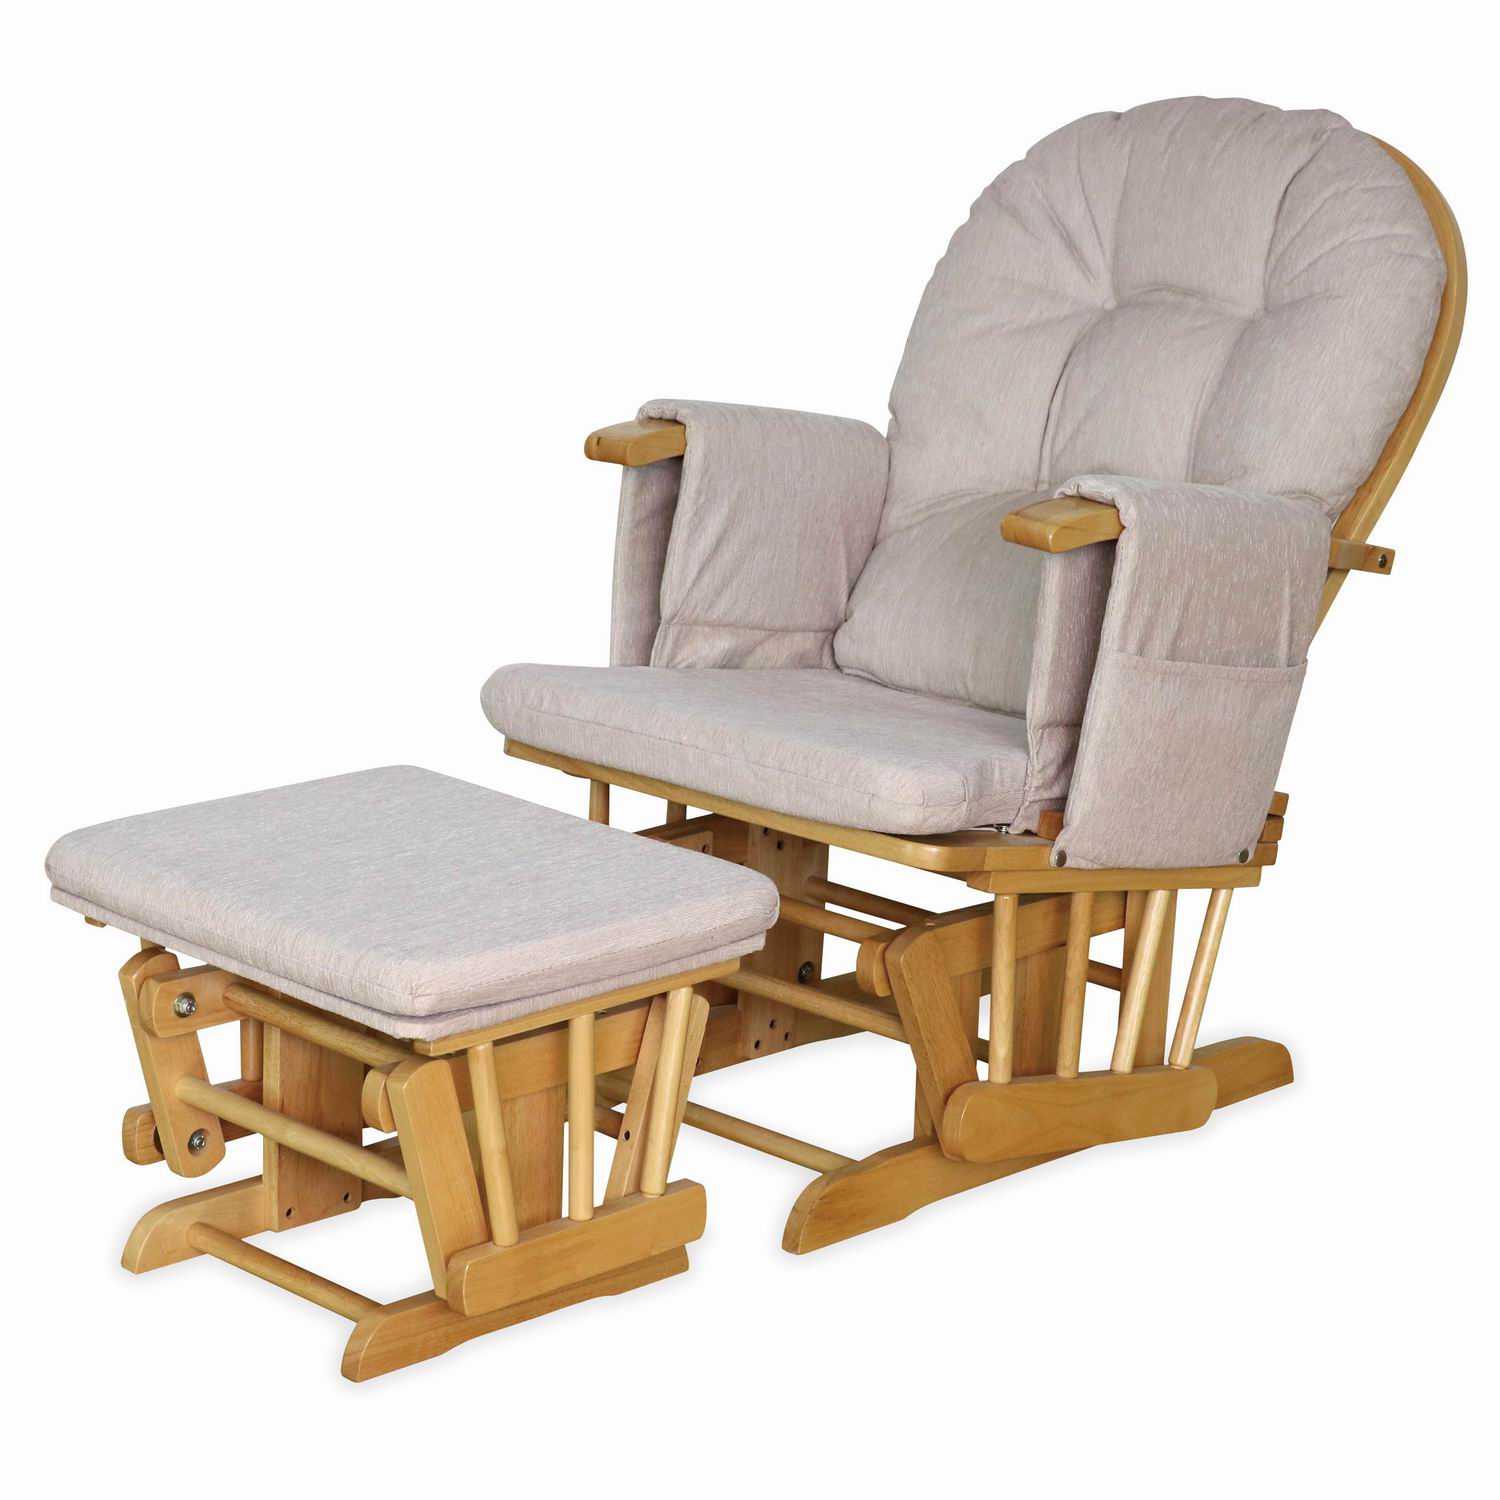 Wooden Gliding Chair with ottoman